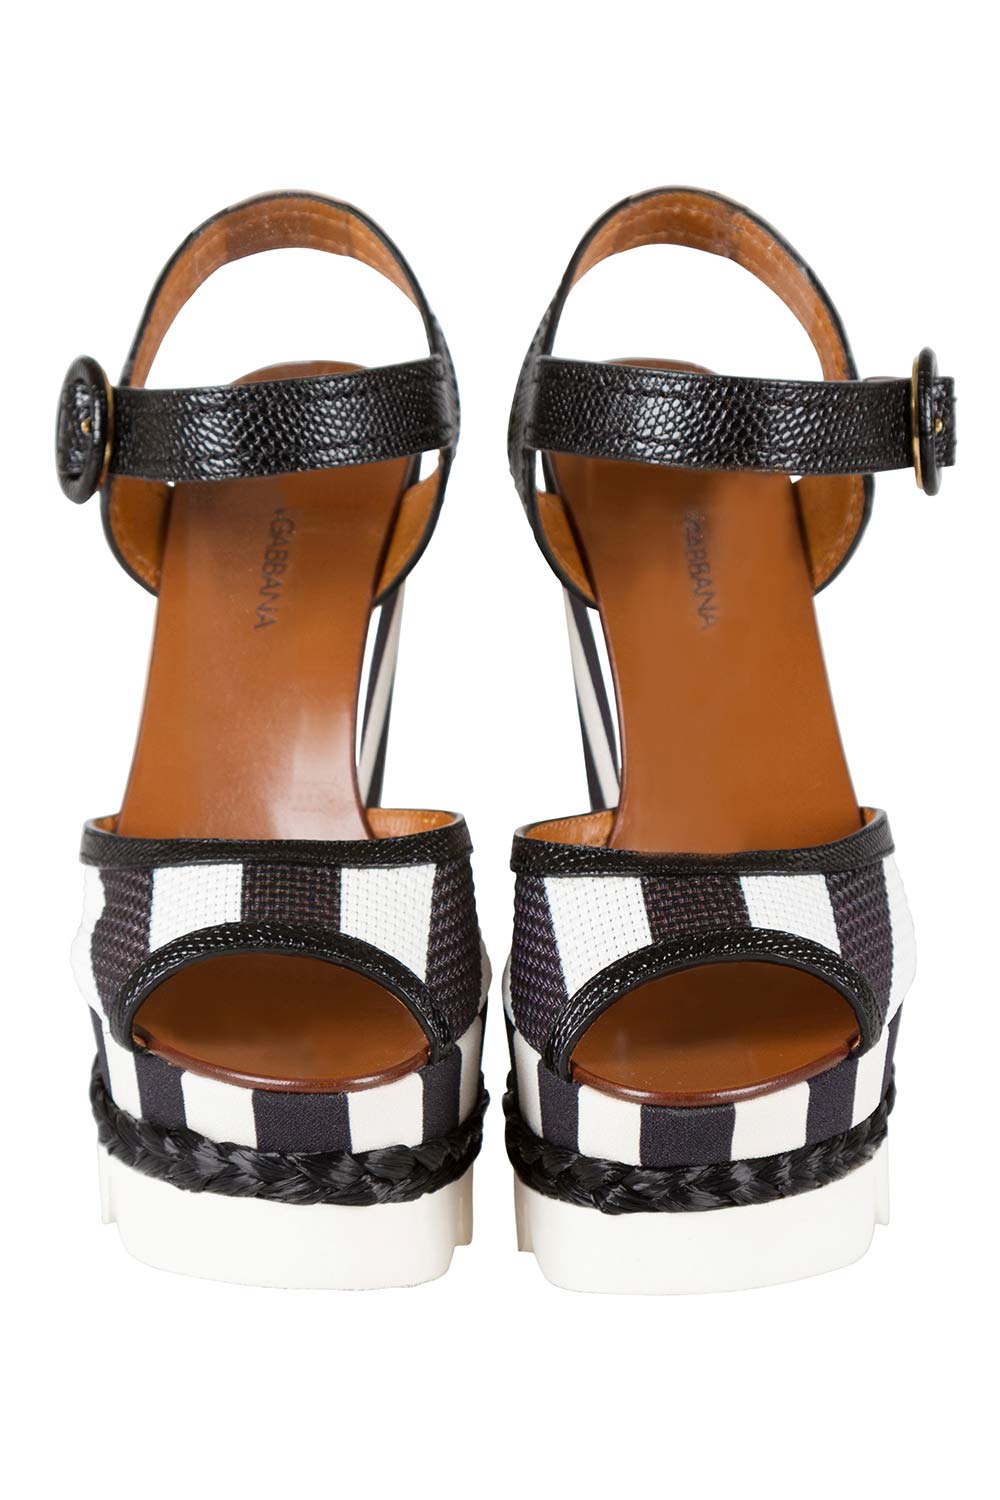 

Dolce And Gabbana Monochrome Leather And Lizard Embossed Leather Ankle Strap Platform Wedge Sandals Size, Black